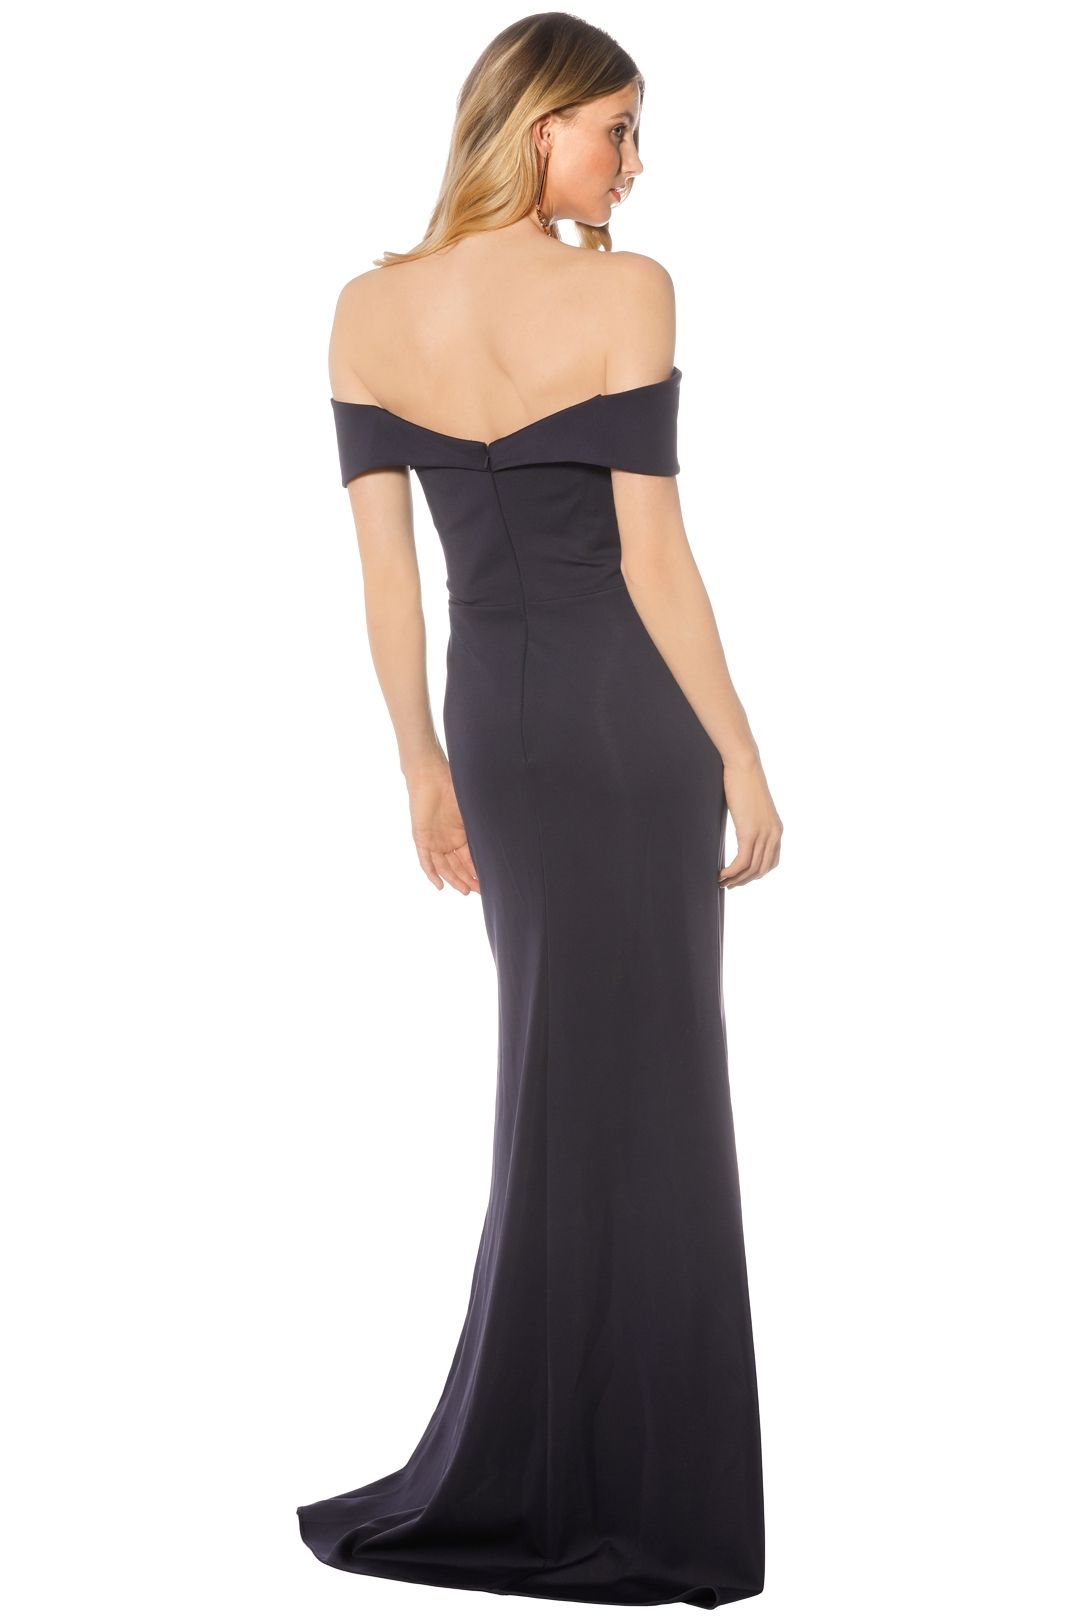 Tinaholy - Sweetheart Gown - Navy - Back